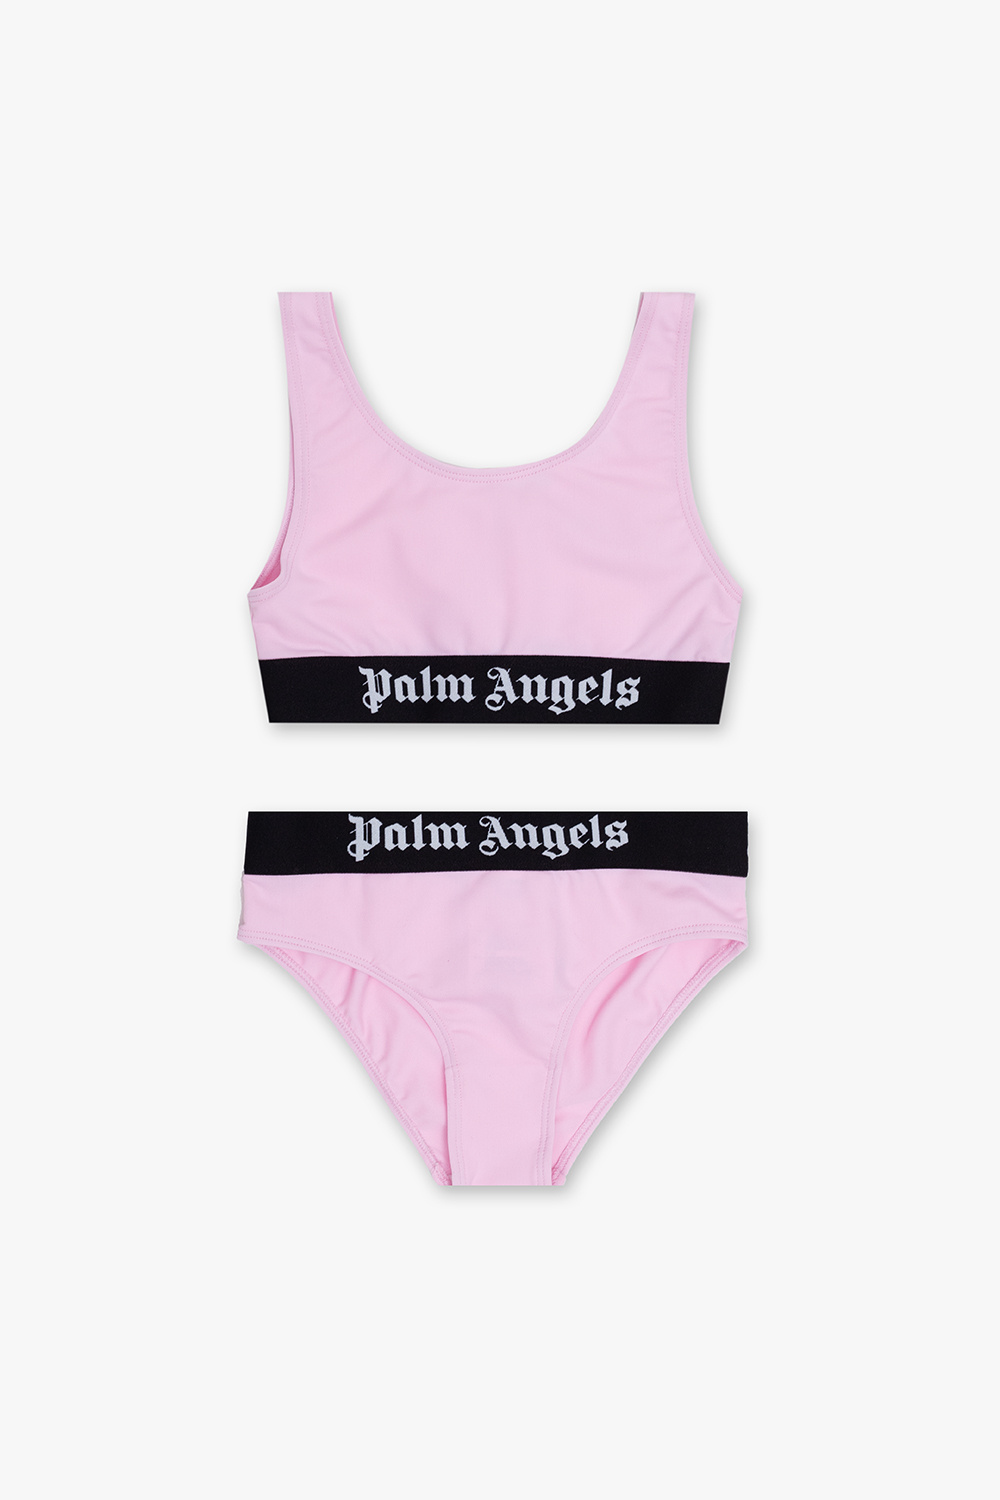 Palm Angels Kids SPRING-SUMMER TRENDS YOU SHOULD KNOW ABOUT